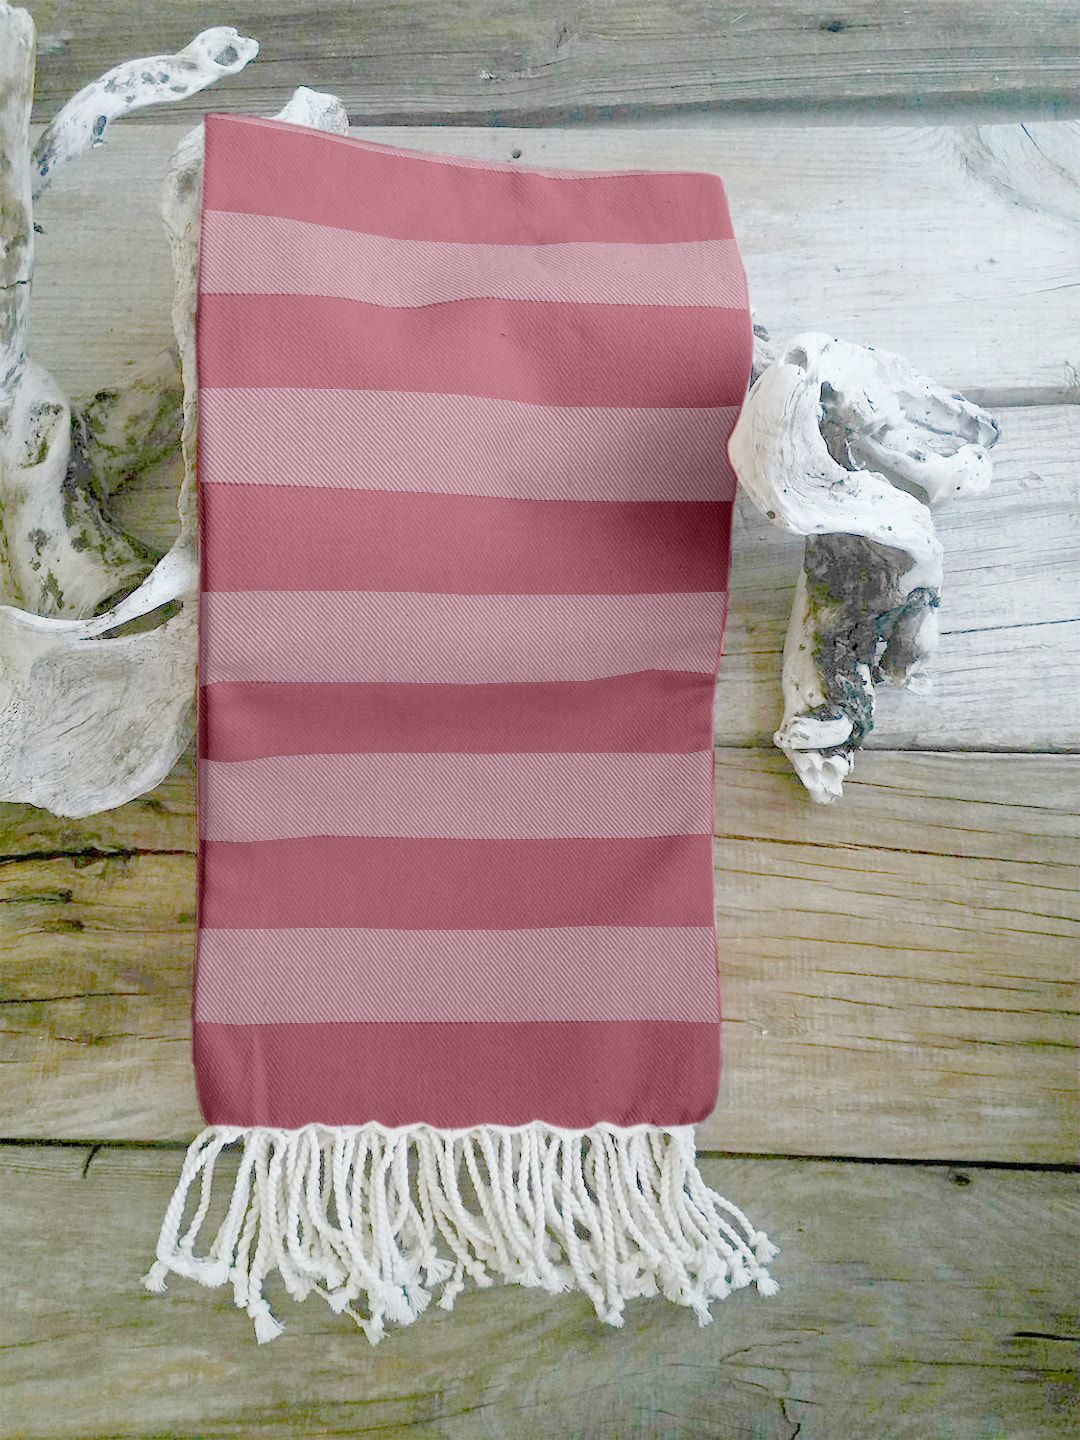 Lushomes Pink Striped Multipurpose Cotton Towel 76 x 152 cms Price in India